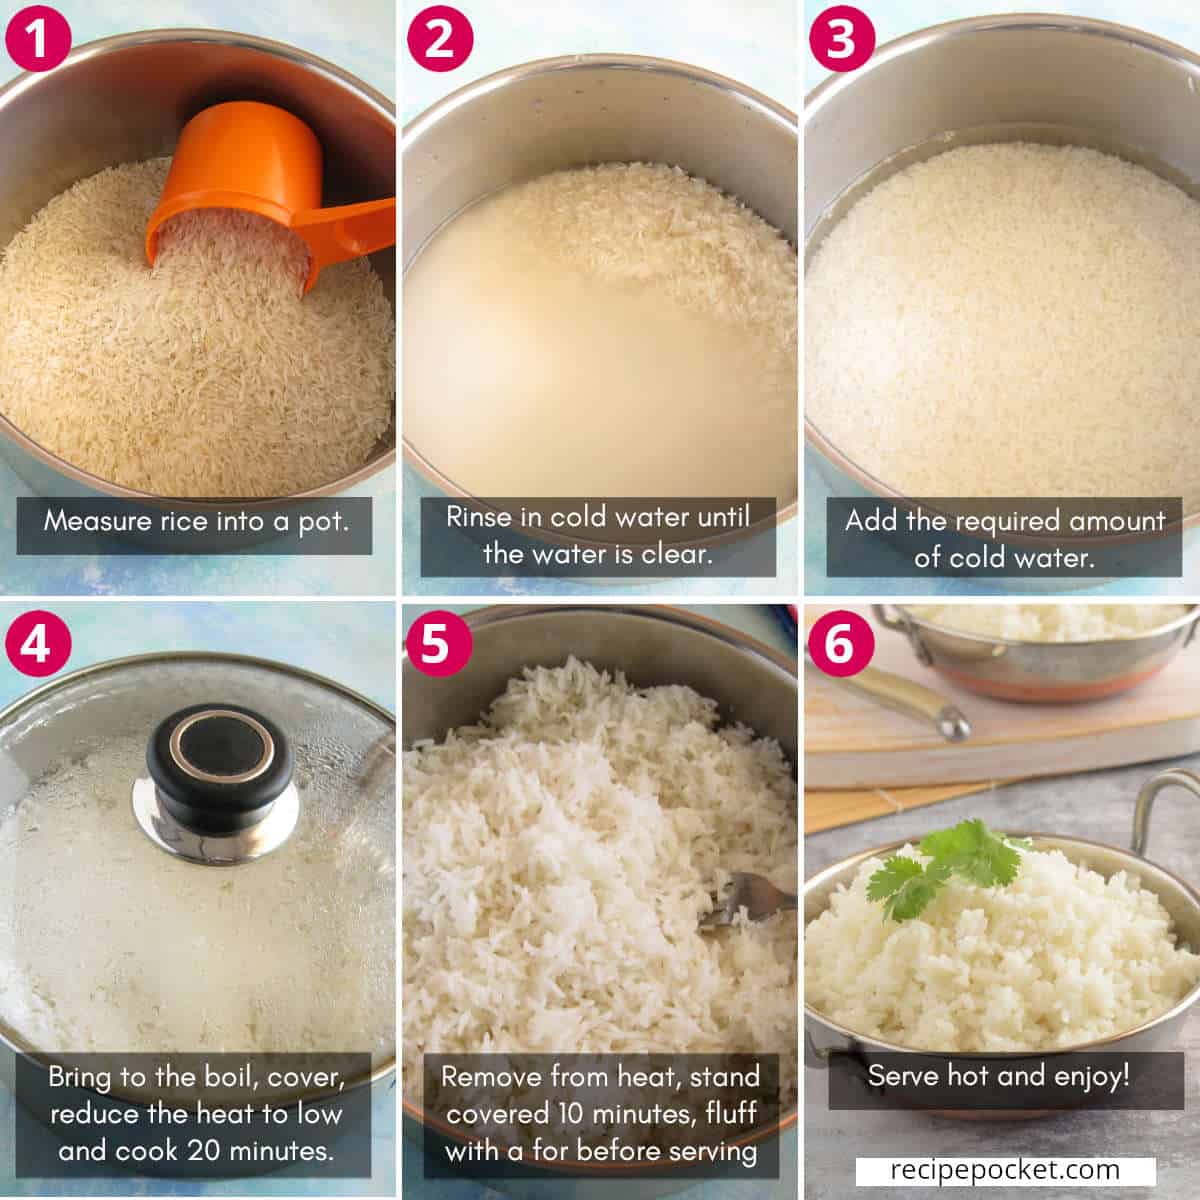 Step by step image showing how to cook basmati rice.